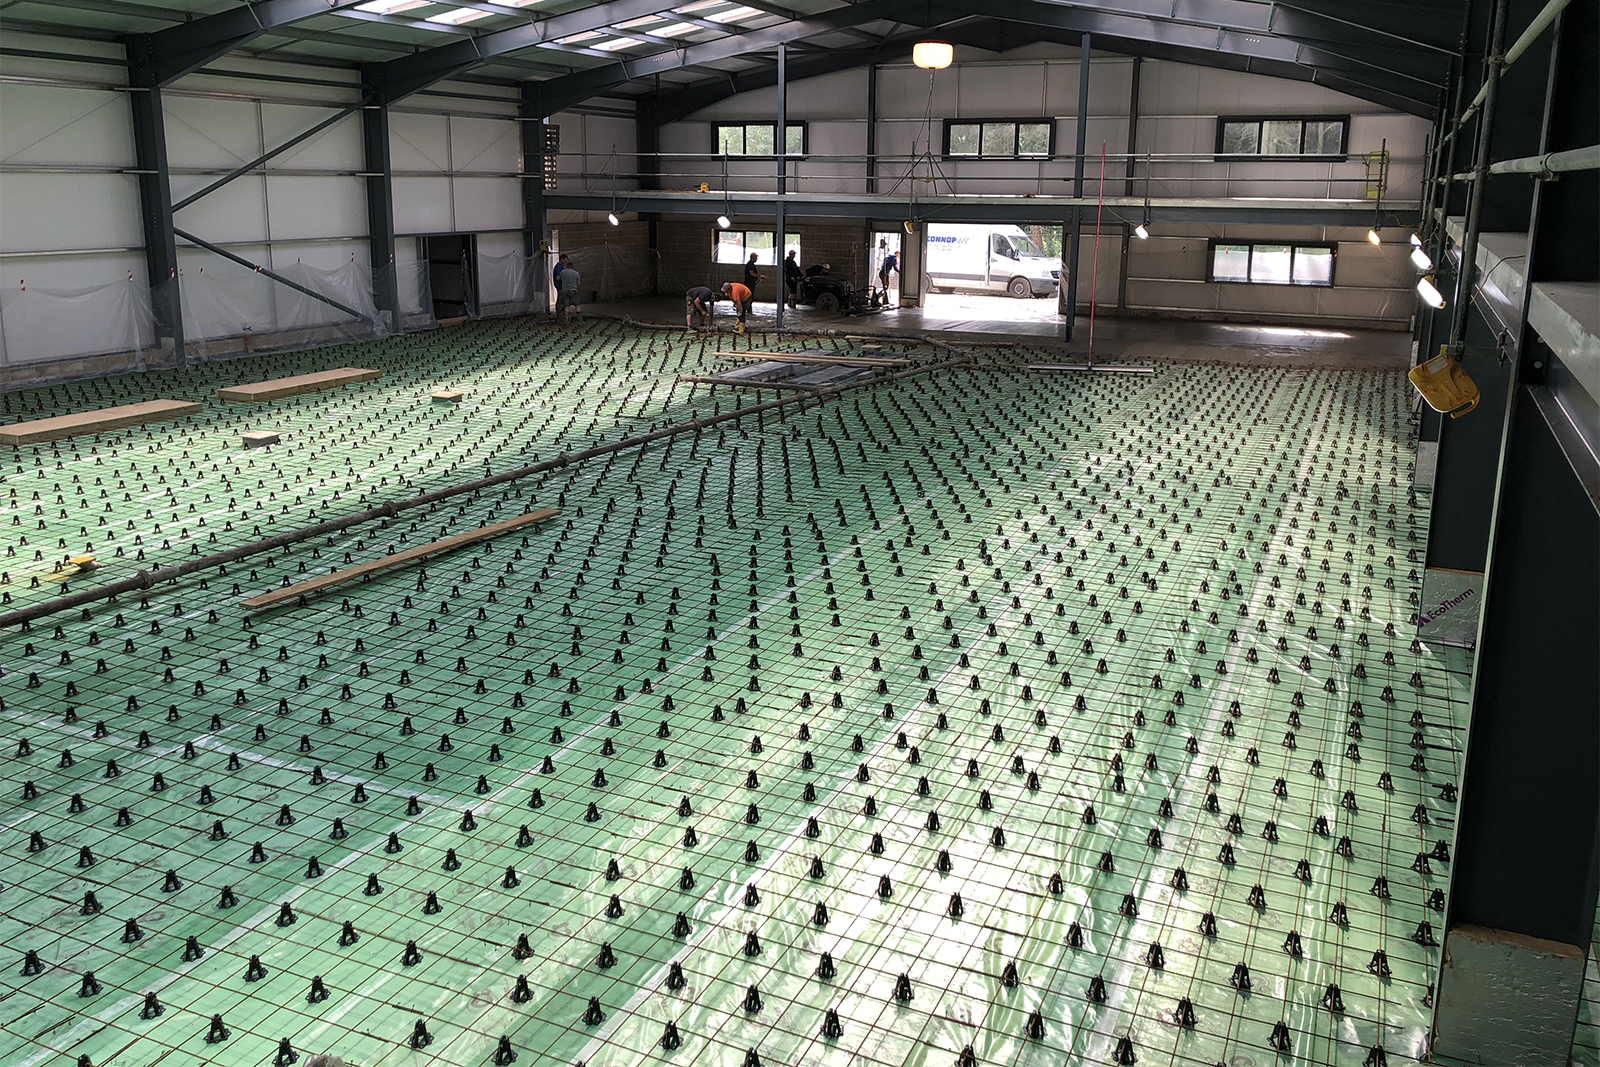 Building Update: Floor is poured in the new Tuthill workshop